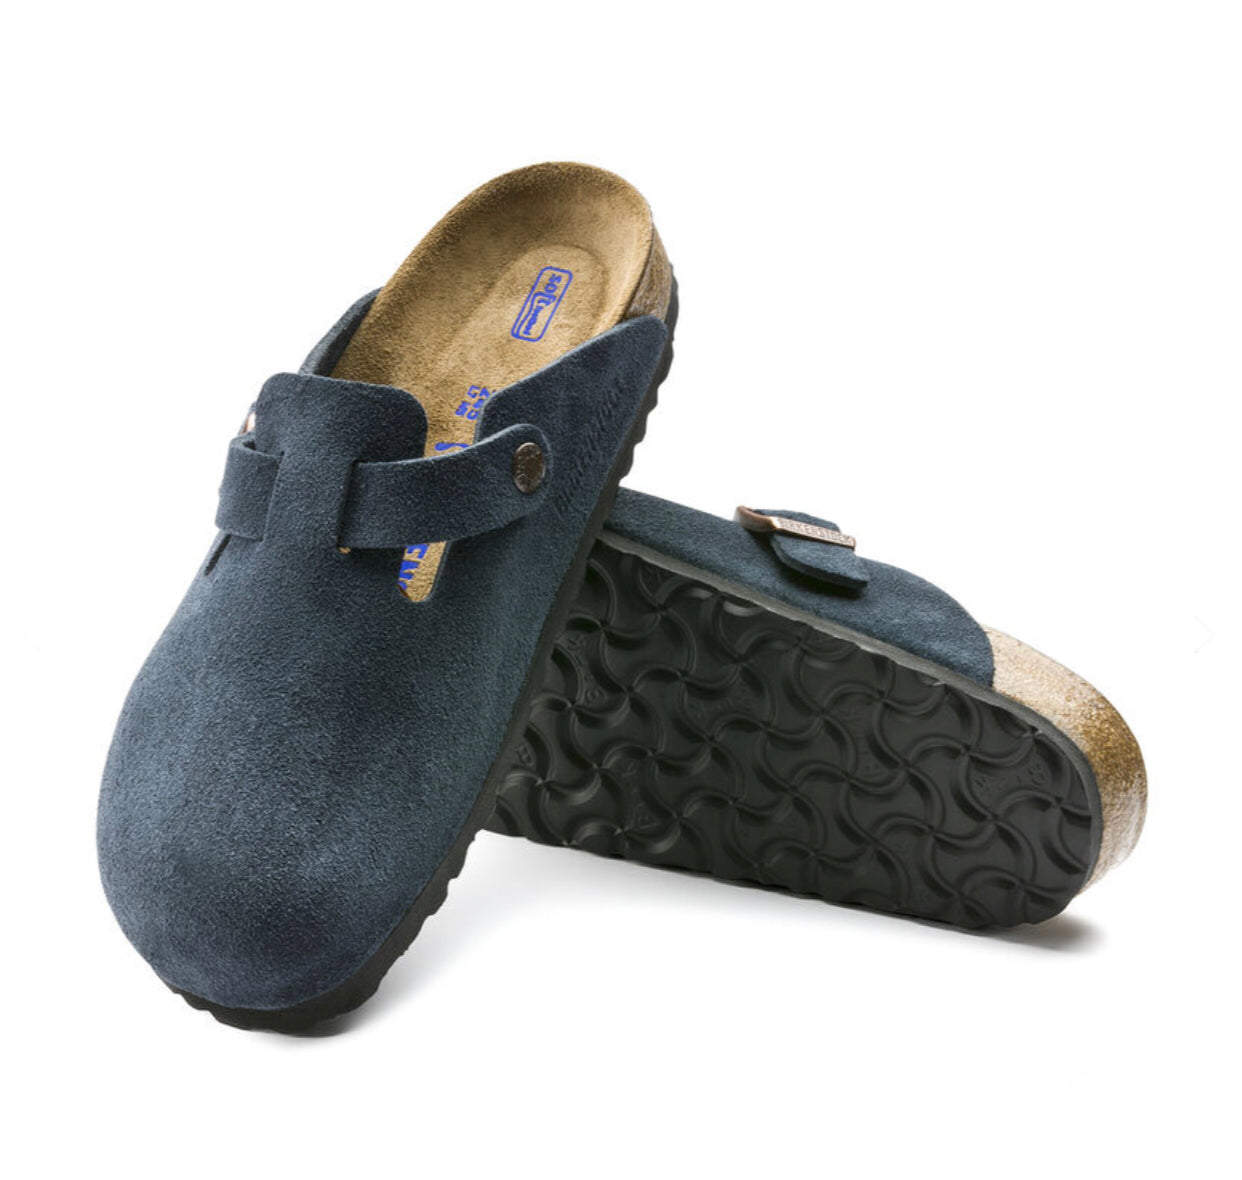 Birkenstock Boston Navy Suede Soft Footbed Made In Germany